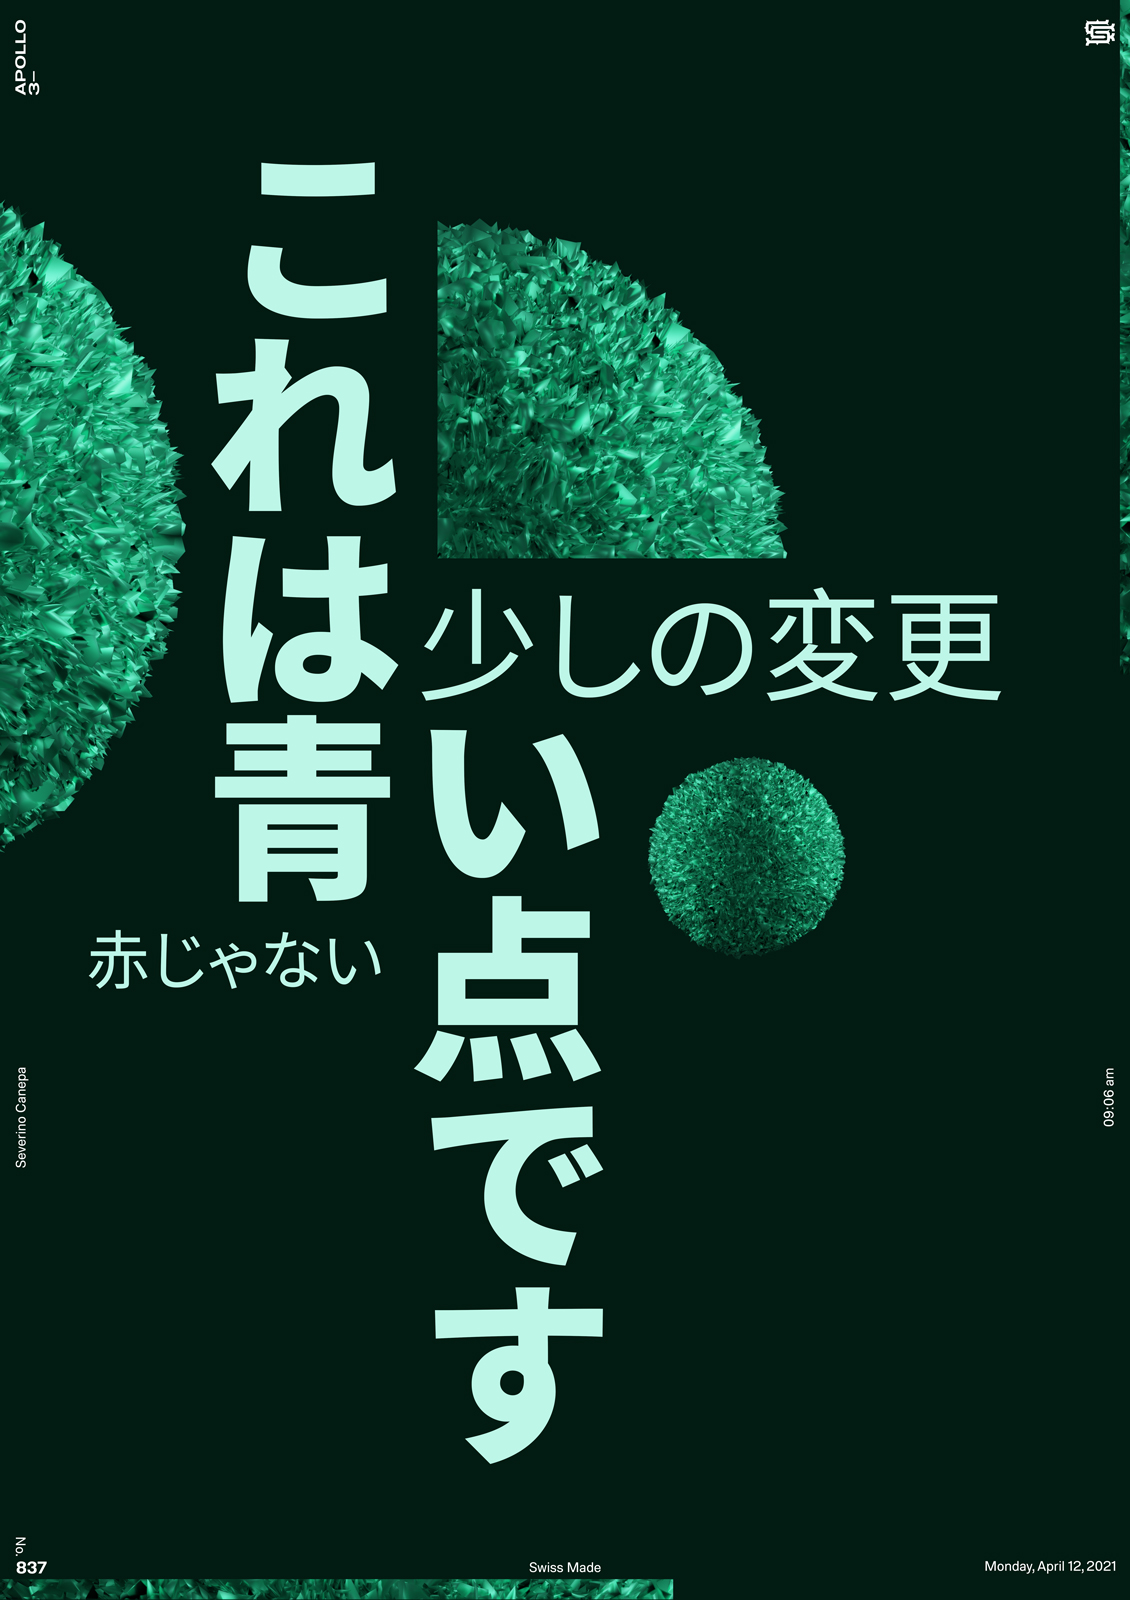 Minimalist and dynamyc composition I created with Japnese typography and 3D shape